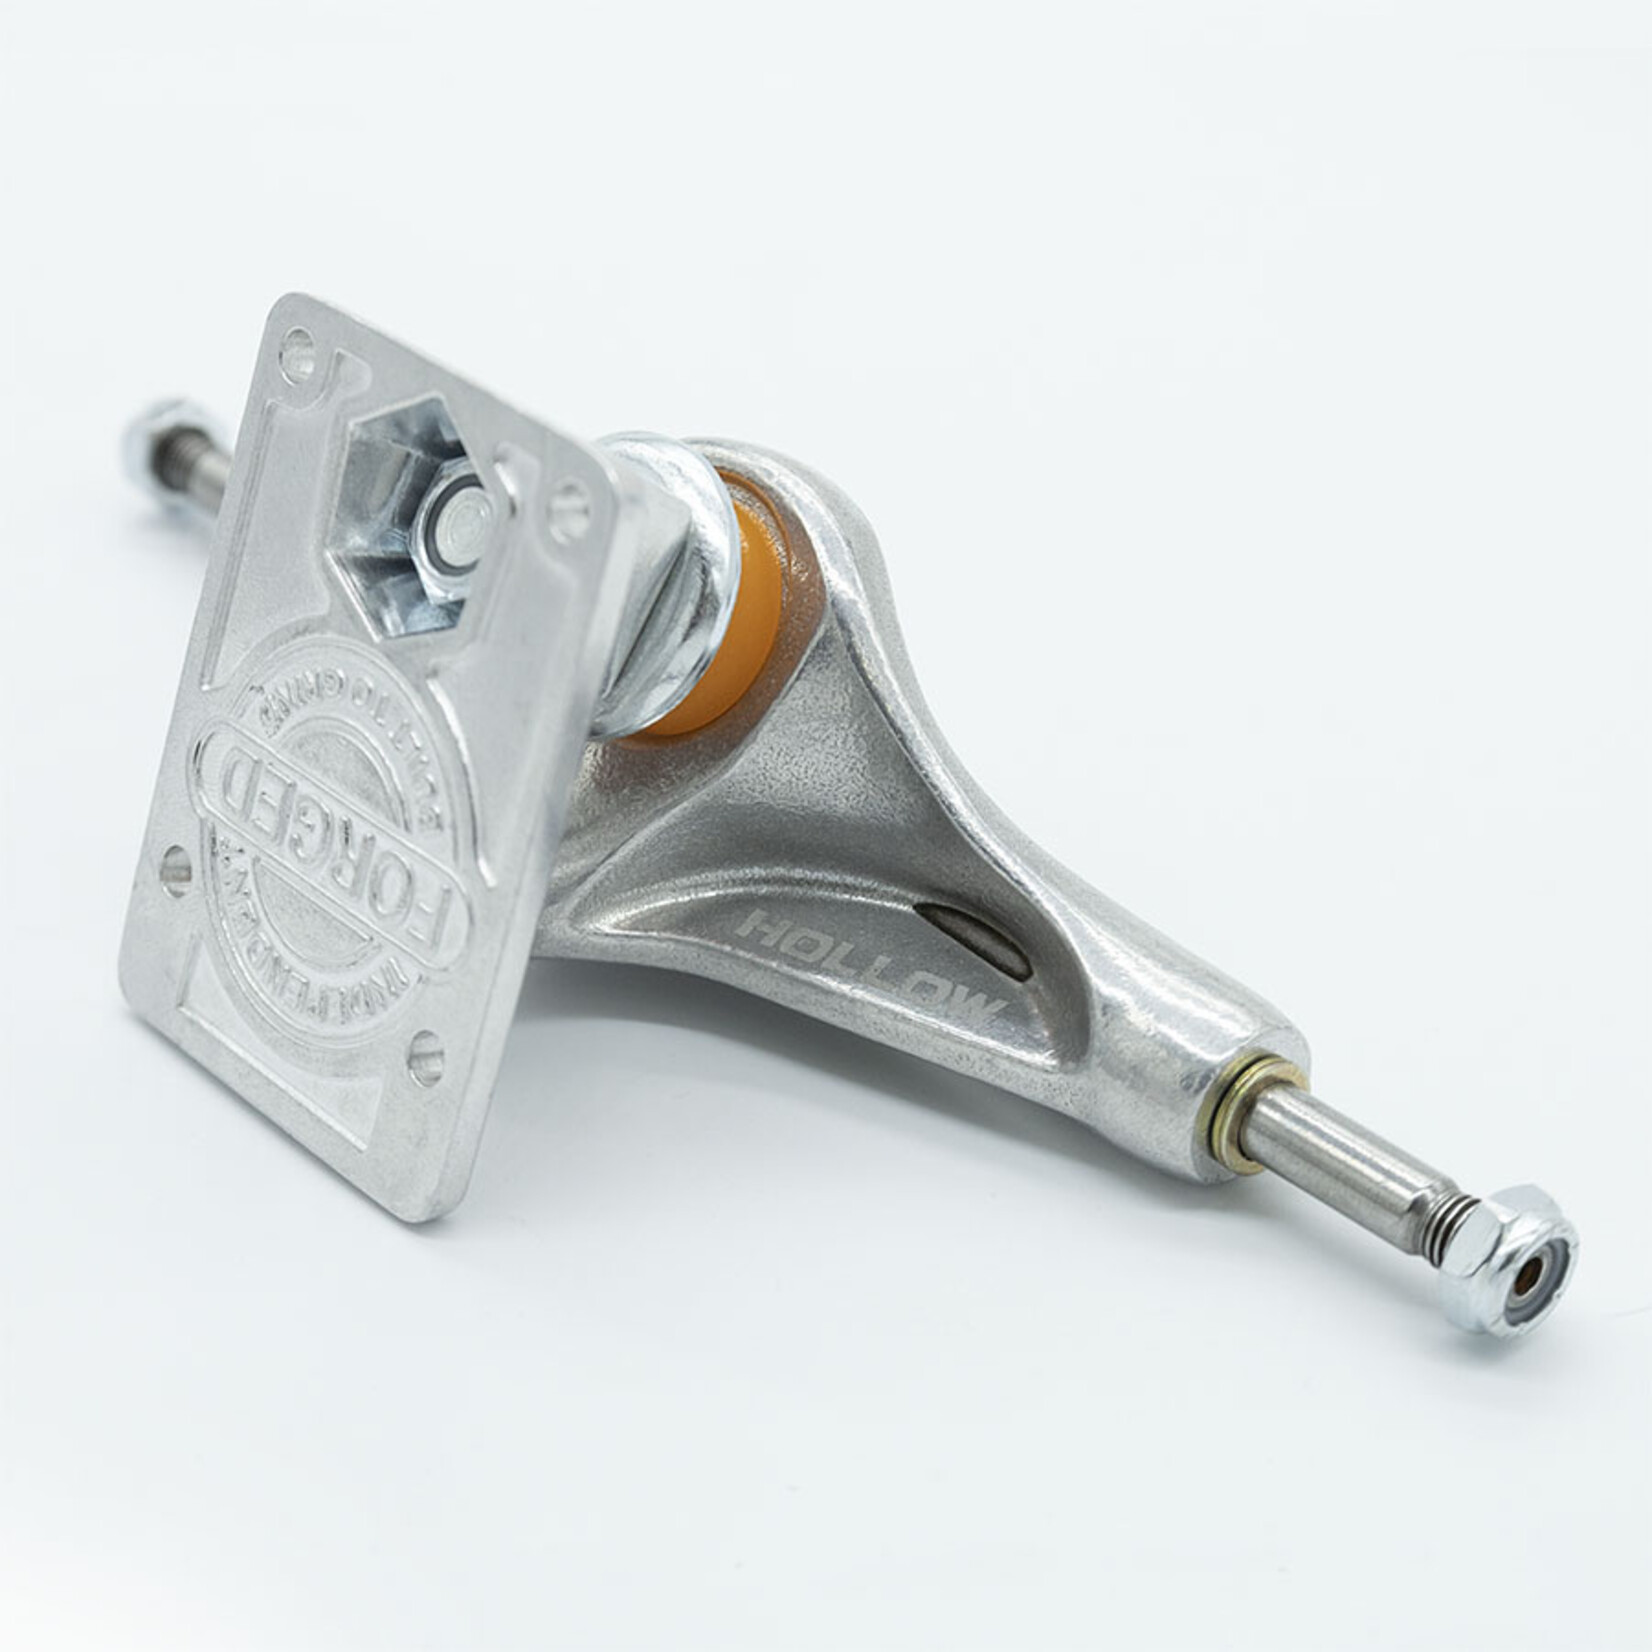 Independent Independent Forged Hollow Mid Trucks - 144, 149